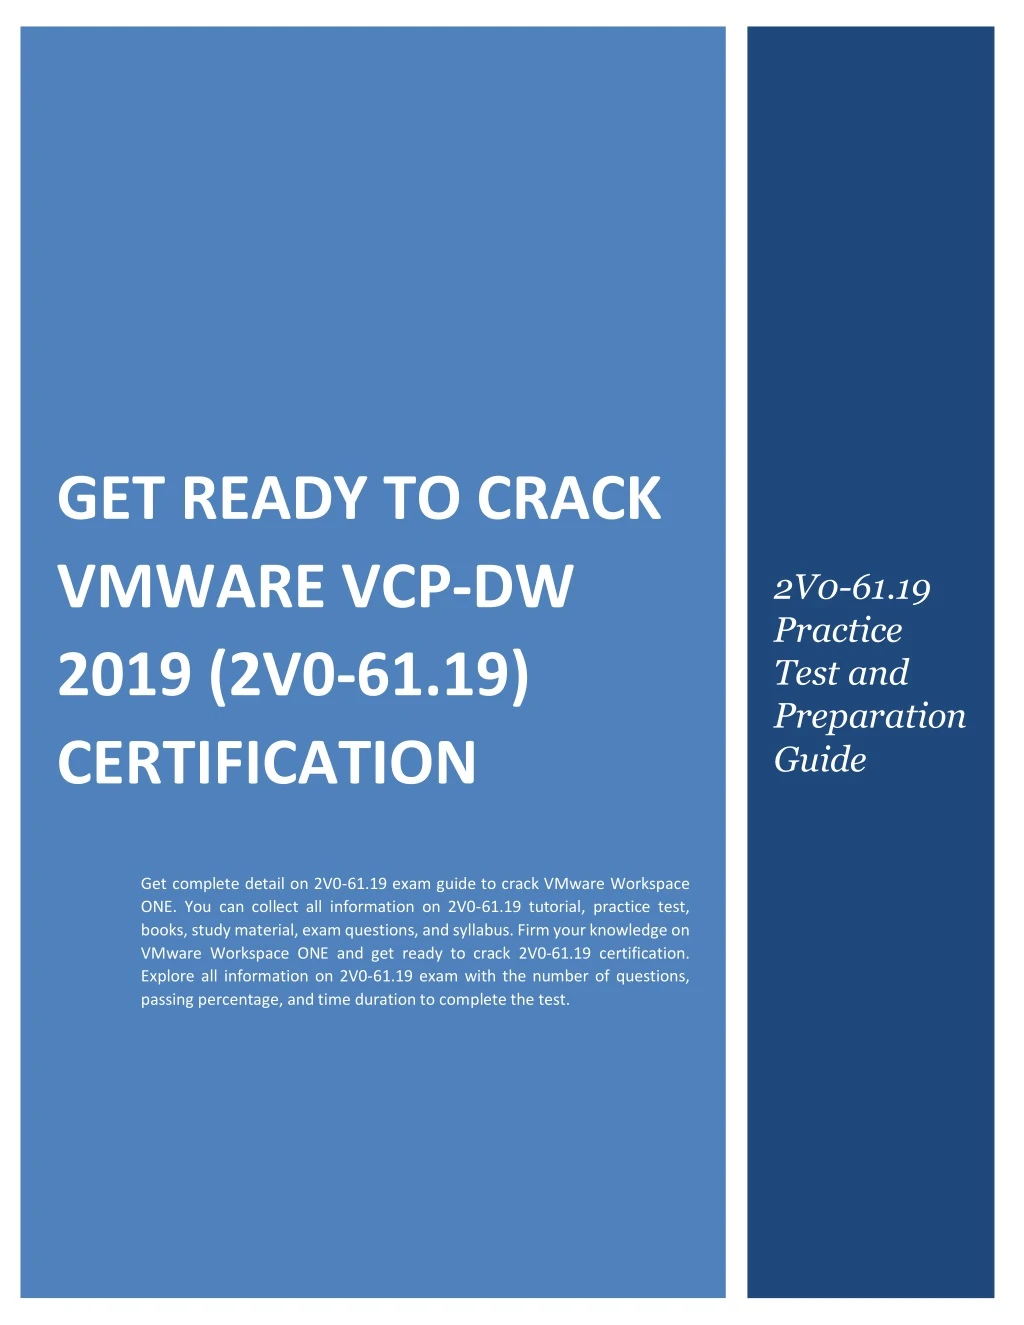 get ready to crack vmware vcp dw 2019